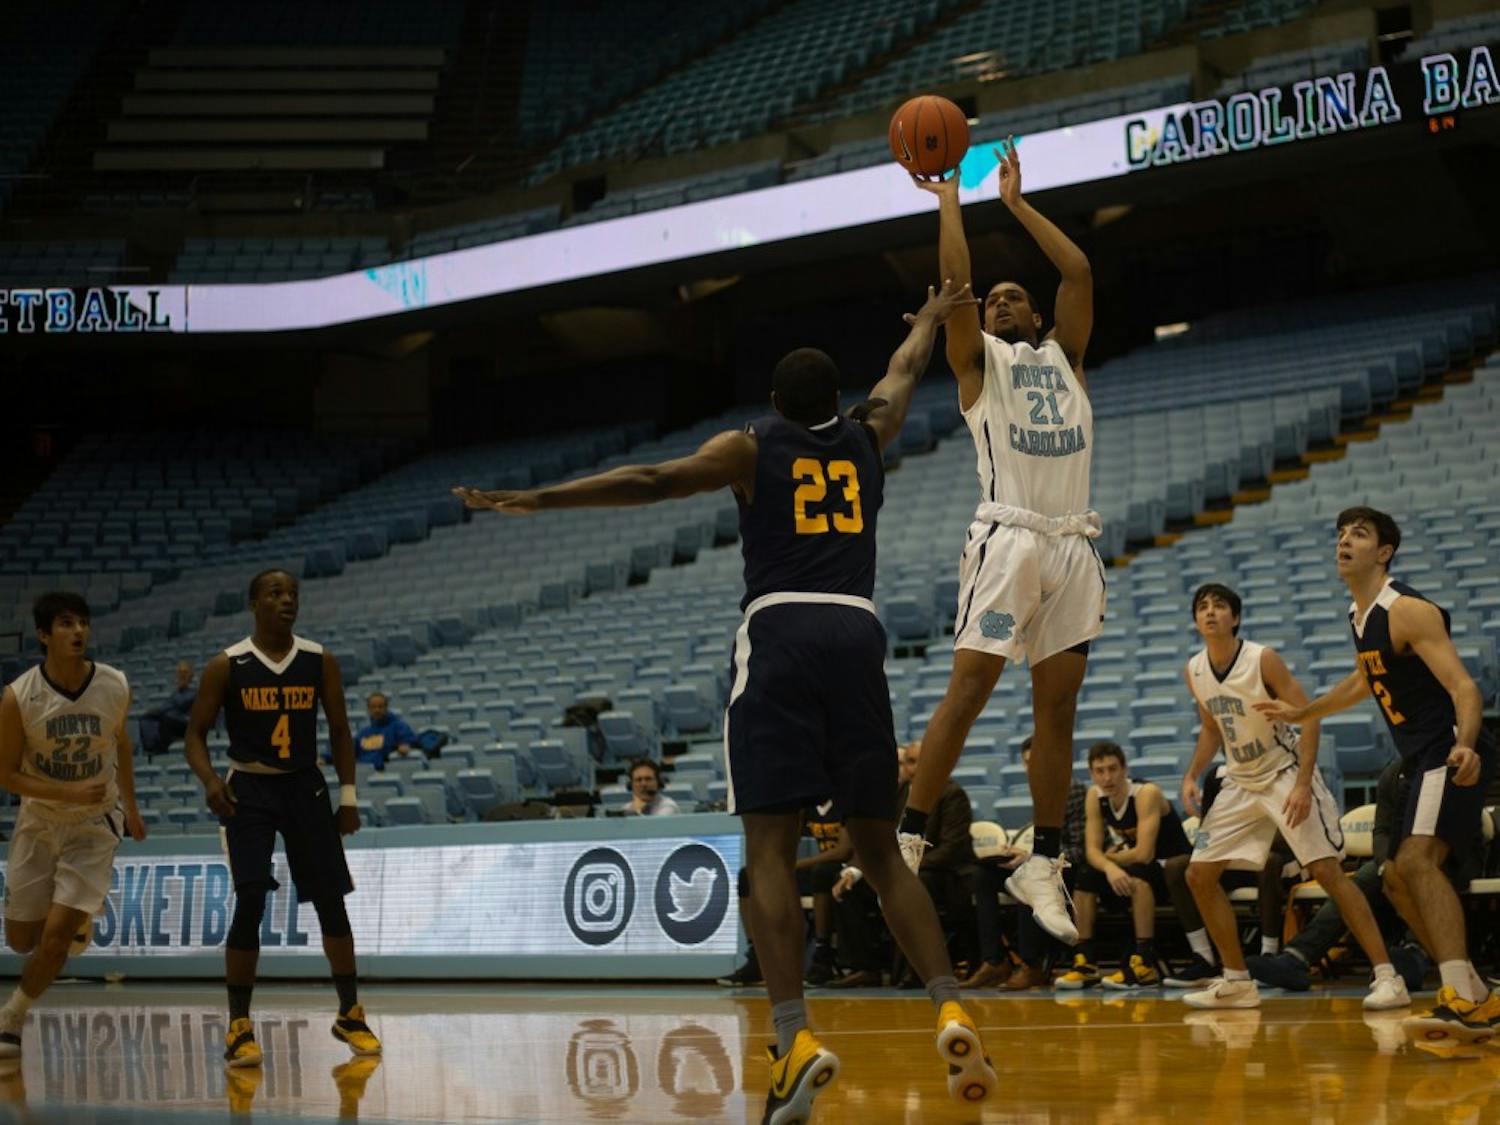 Michael Armstrong (23) attempts to block Nehemiah Stewart (21) from making a basket during a game against Wake Tech on January 15, 2019 at the Dean E. Smith Center. UNC JV won 80-64.